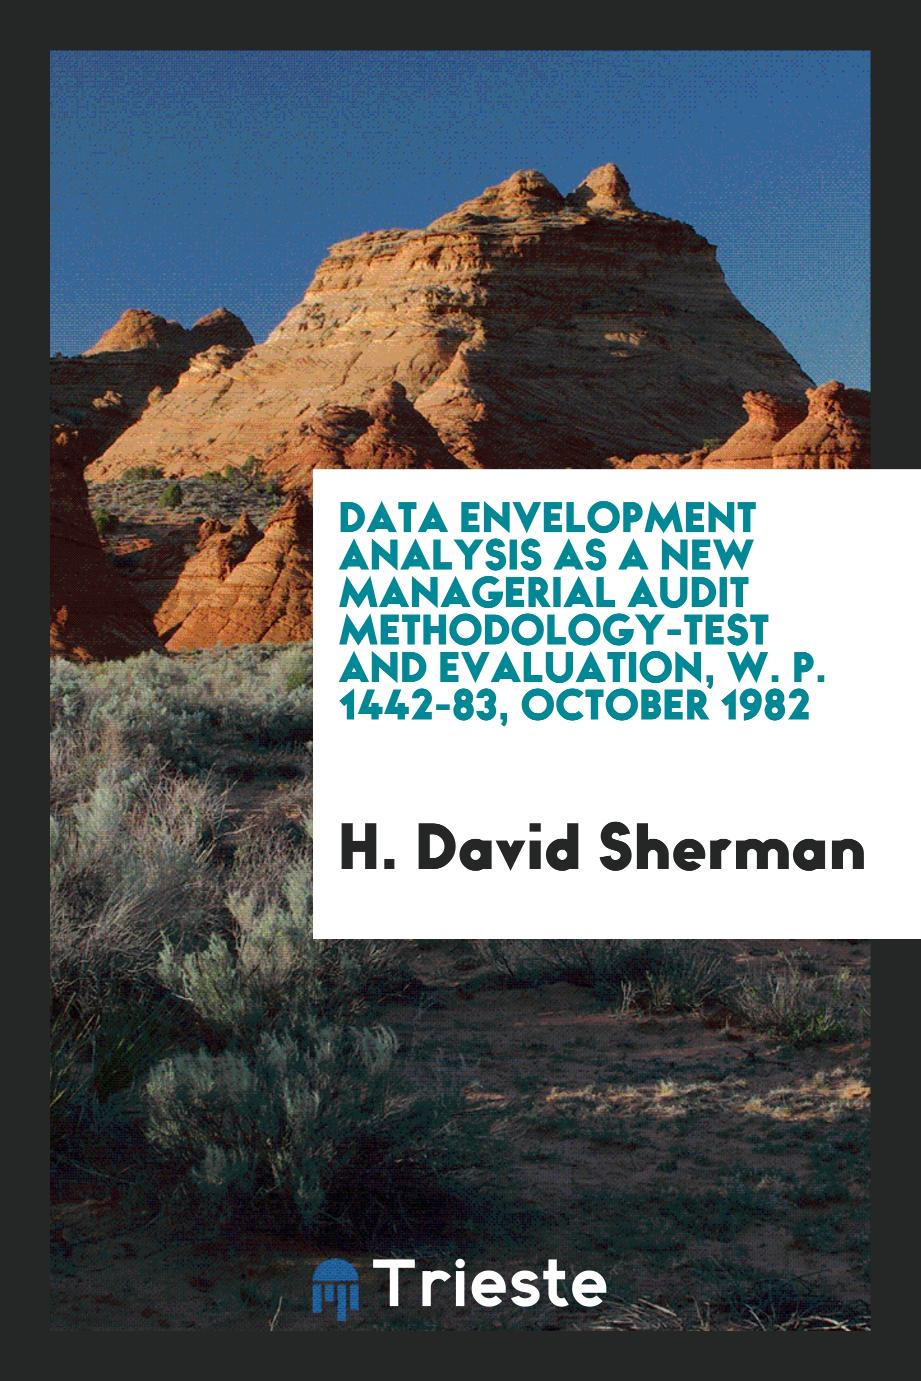 Data Envelopment Analysis as a New Managerial Audit Methodology-Test and Evaluation, W. P. 1442-83, October 1982